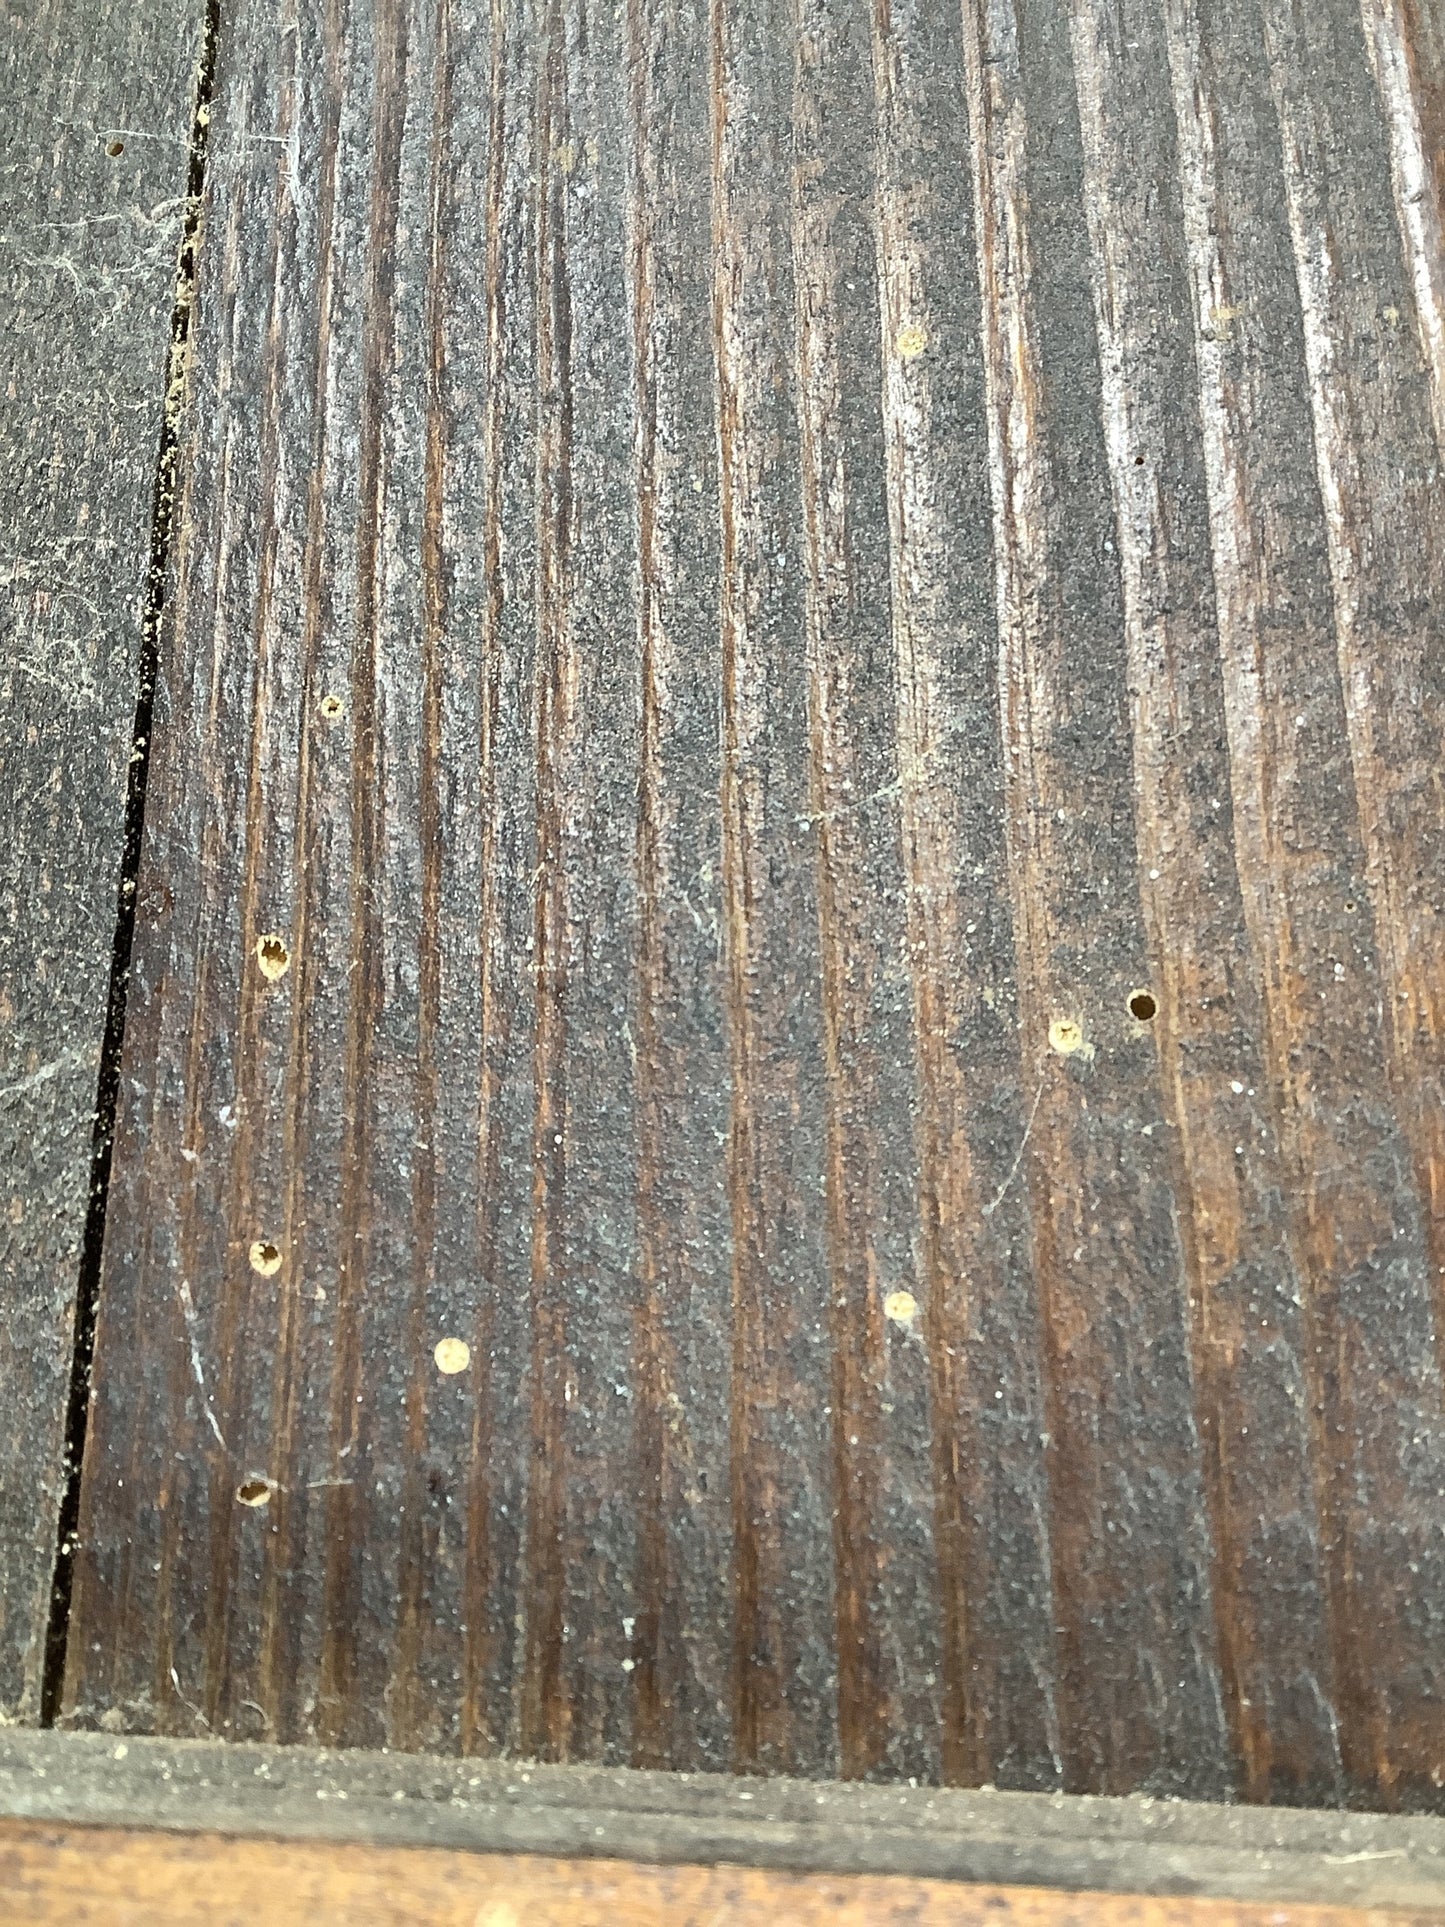 11th Picture showing treated woodworm